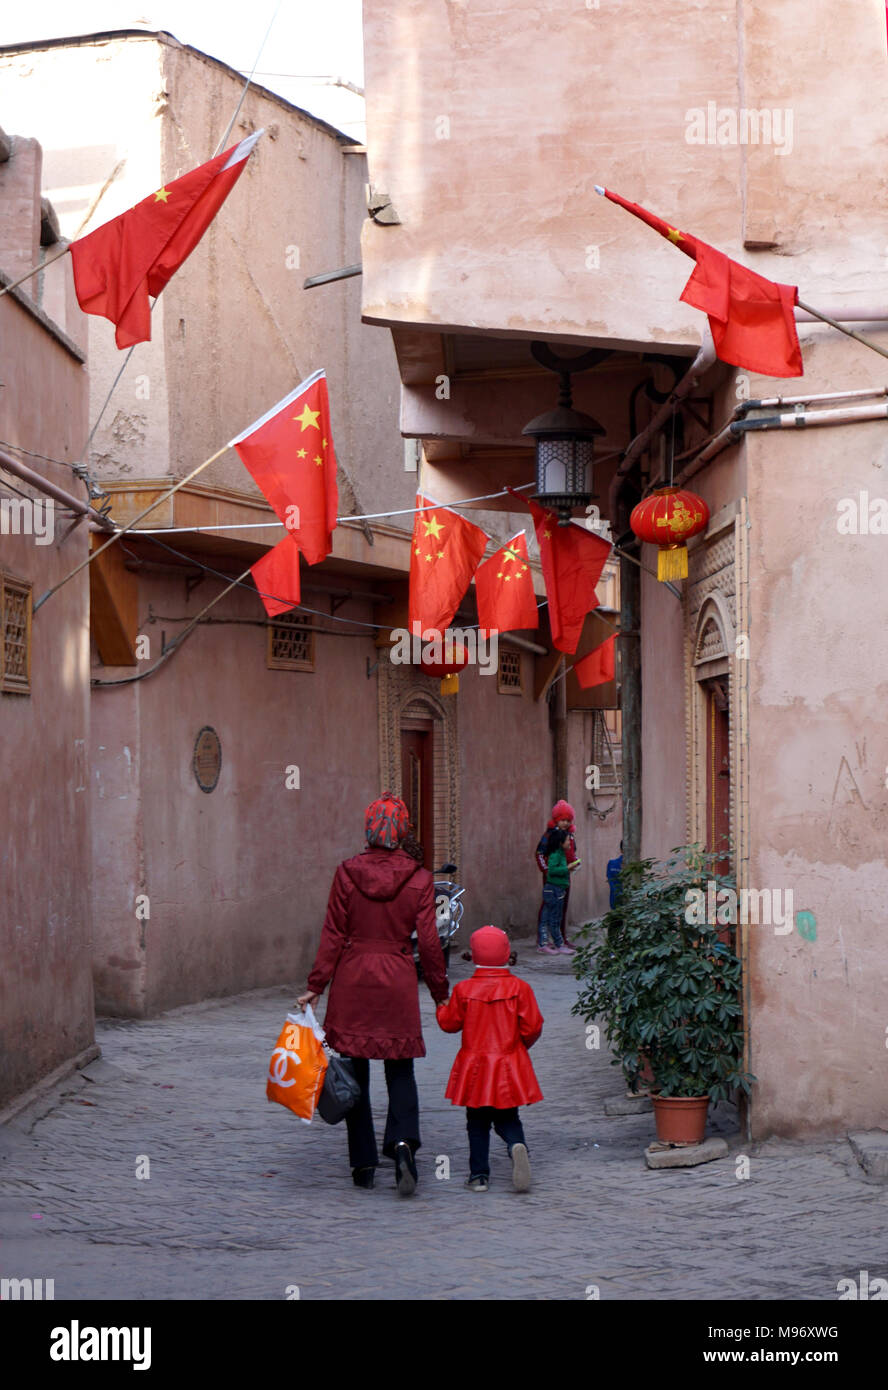 In the old town of Kashgar in Xinjiang, China Stock Photo